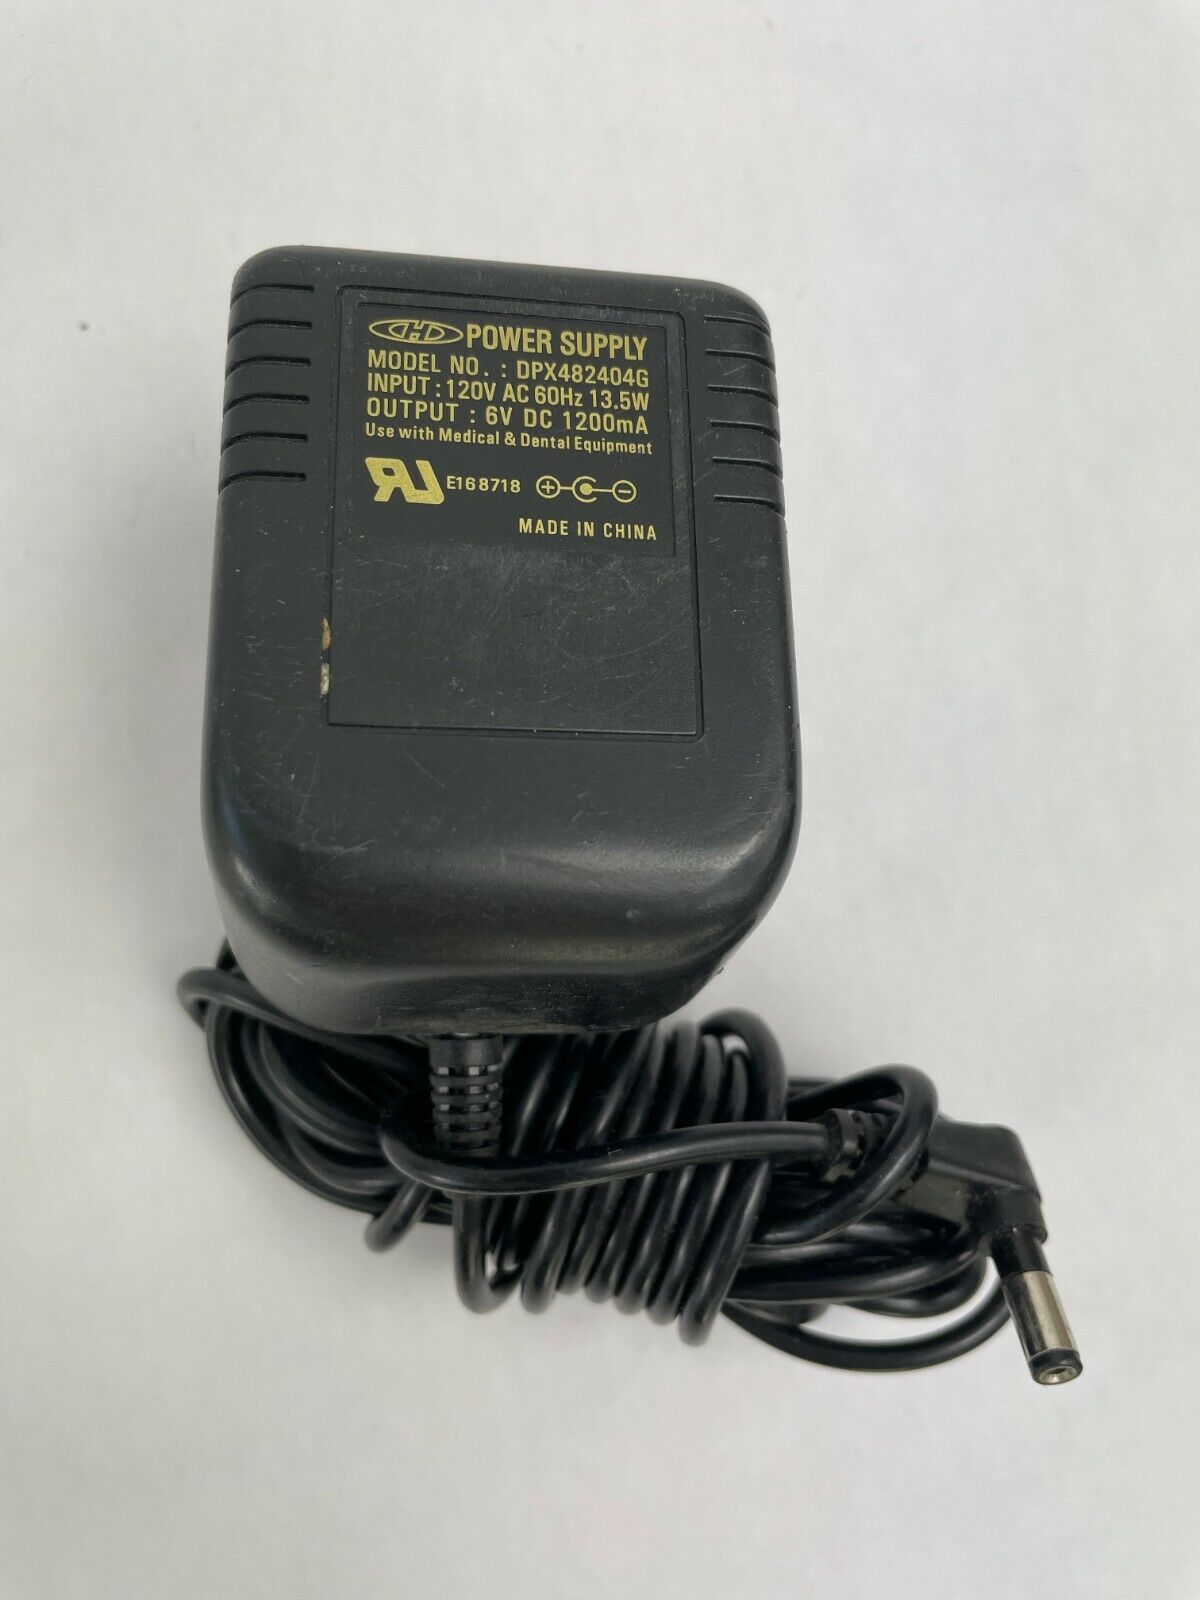 Genuine Ac Adapter DPX 4842404G Output 6 V DC 1200 mA Power Supply Adapter A71 Compatible Brand: Universal Type: Po